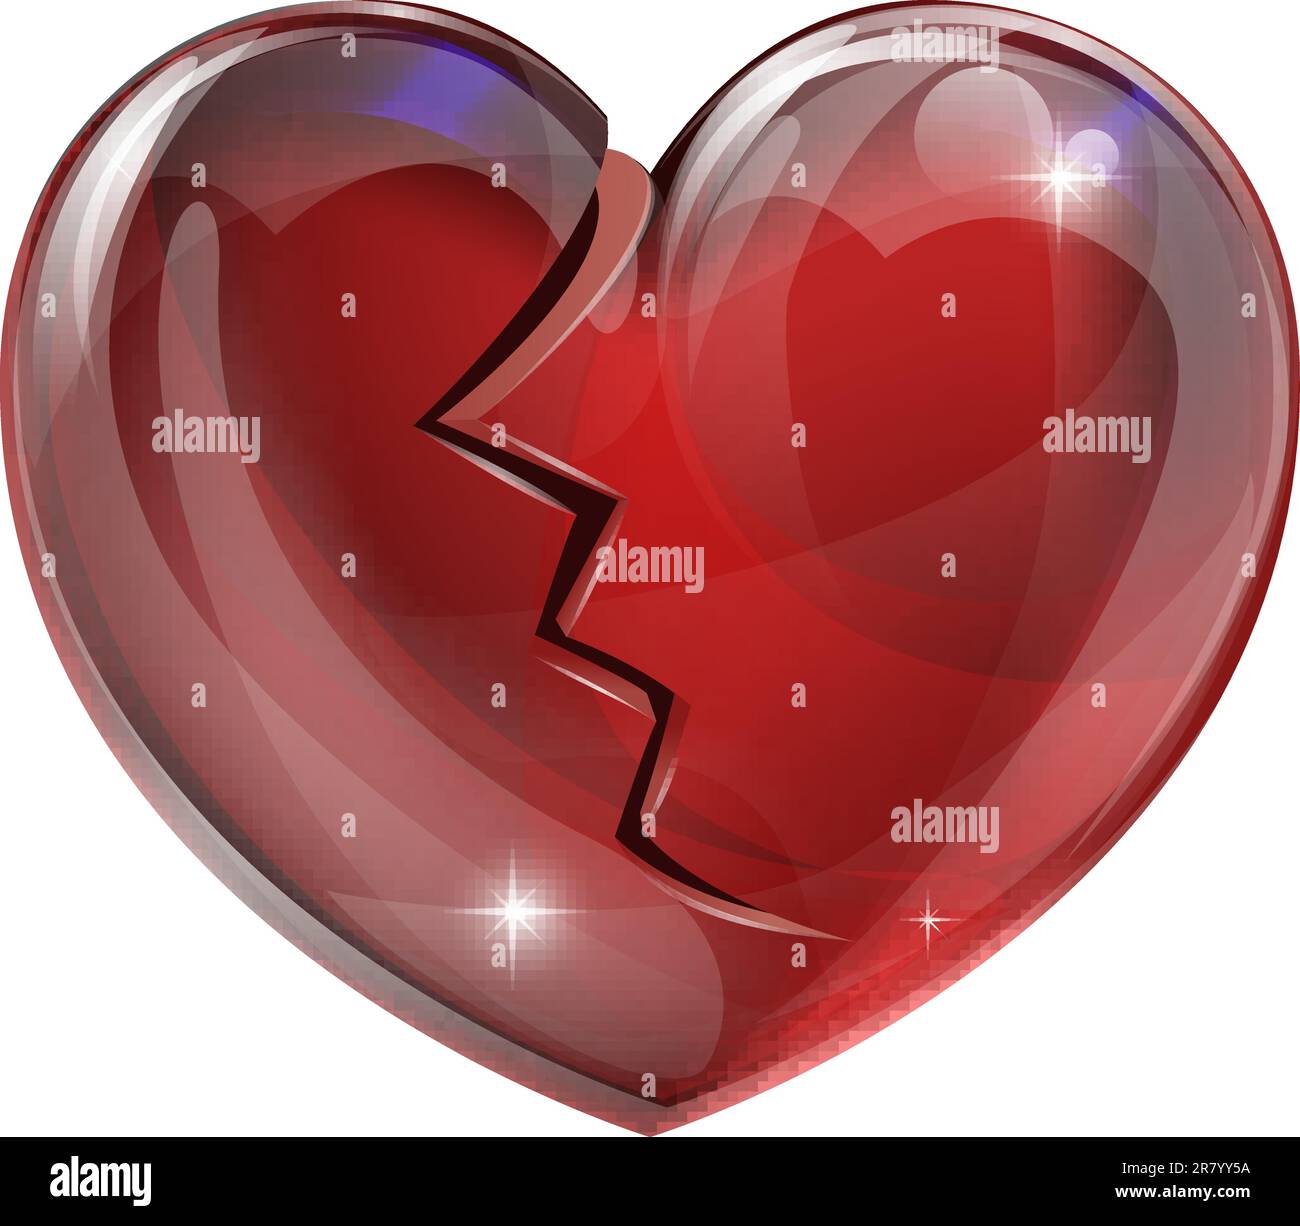 Illustration of a broken heart with a crack. Concept for heart disease or problems, being heartbroken, bereaved or unlucky in love. Stock Vector